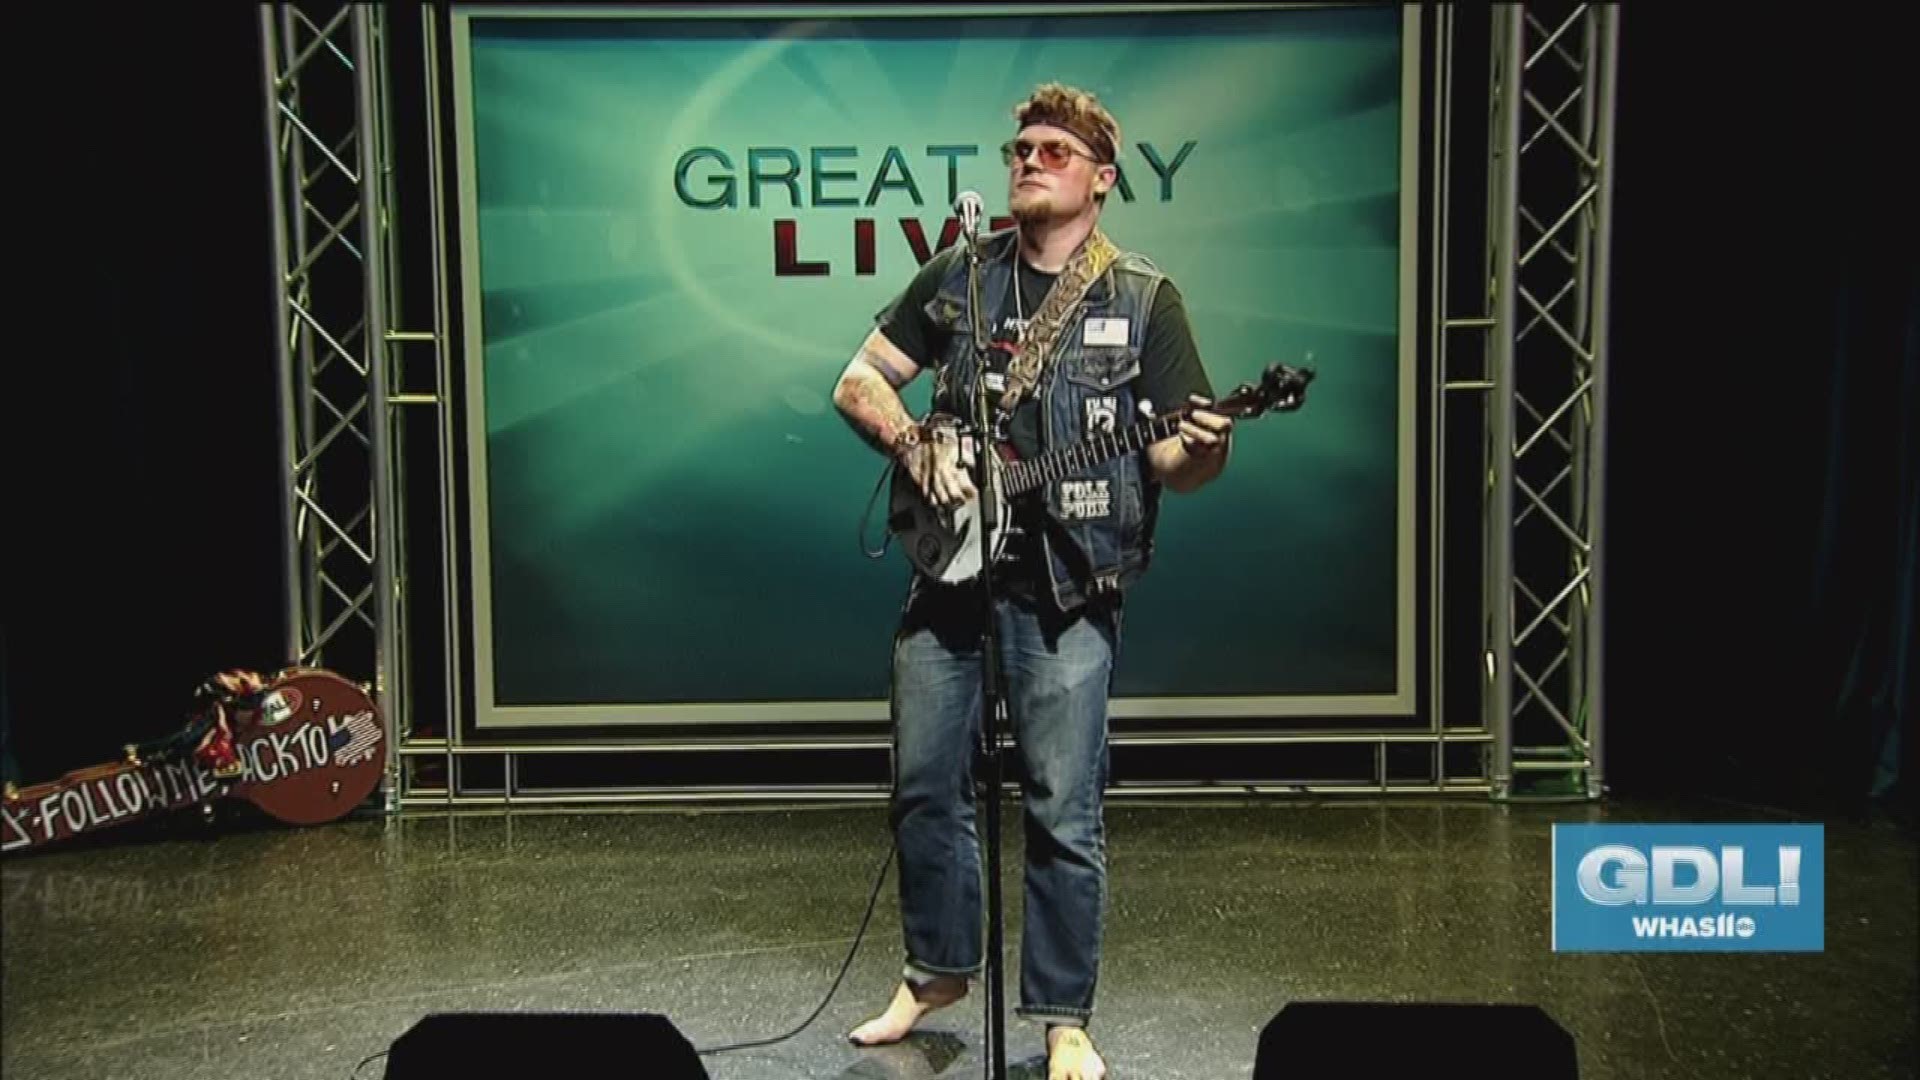 Allan Anderson goes by the stage name Forty and he stopped by Great Day Live to play some of his original songs.